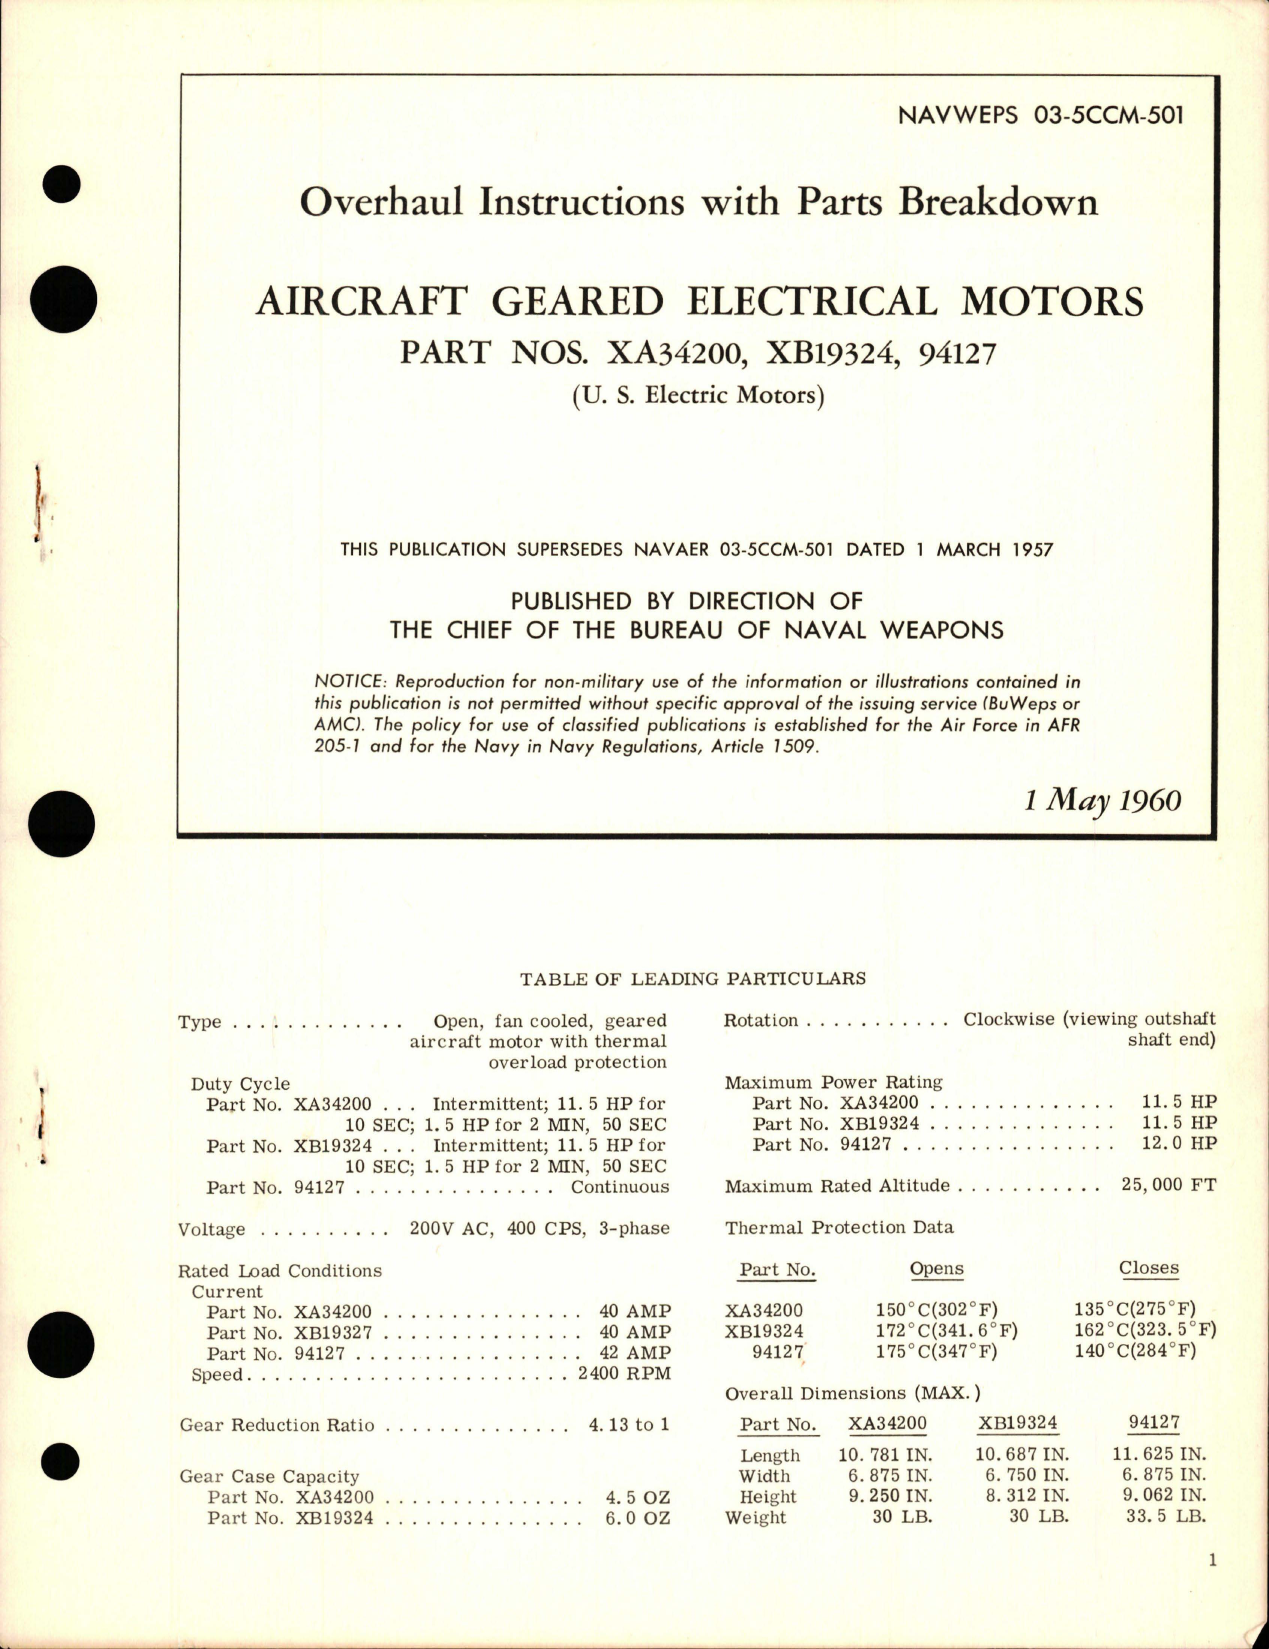 Sample page 1 from AirCorps Library document: Overhaul Instructions with Parts Breakdown for Geared Electrical Motors - Parts XA34200, XB19324, and 94127